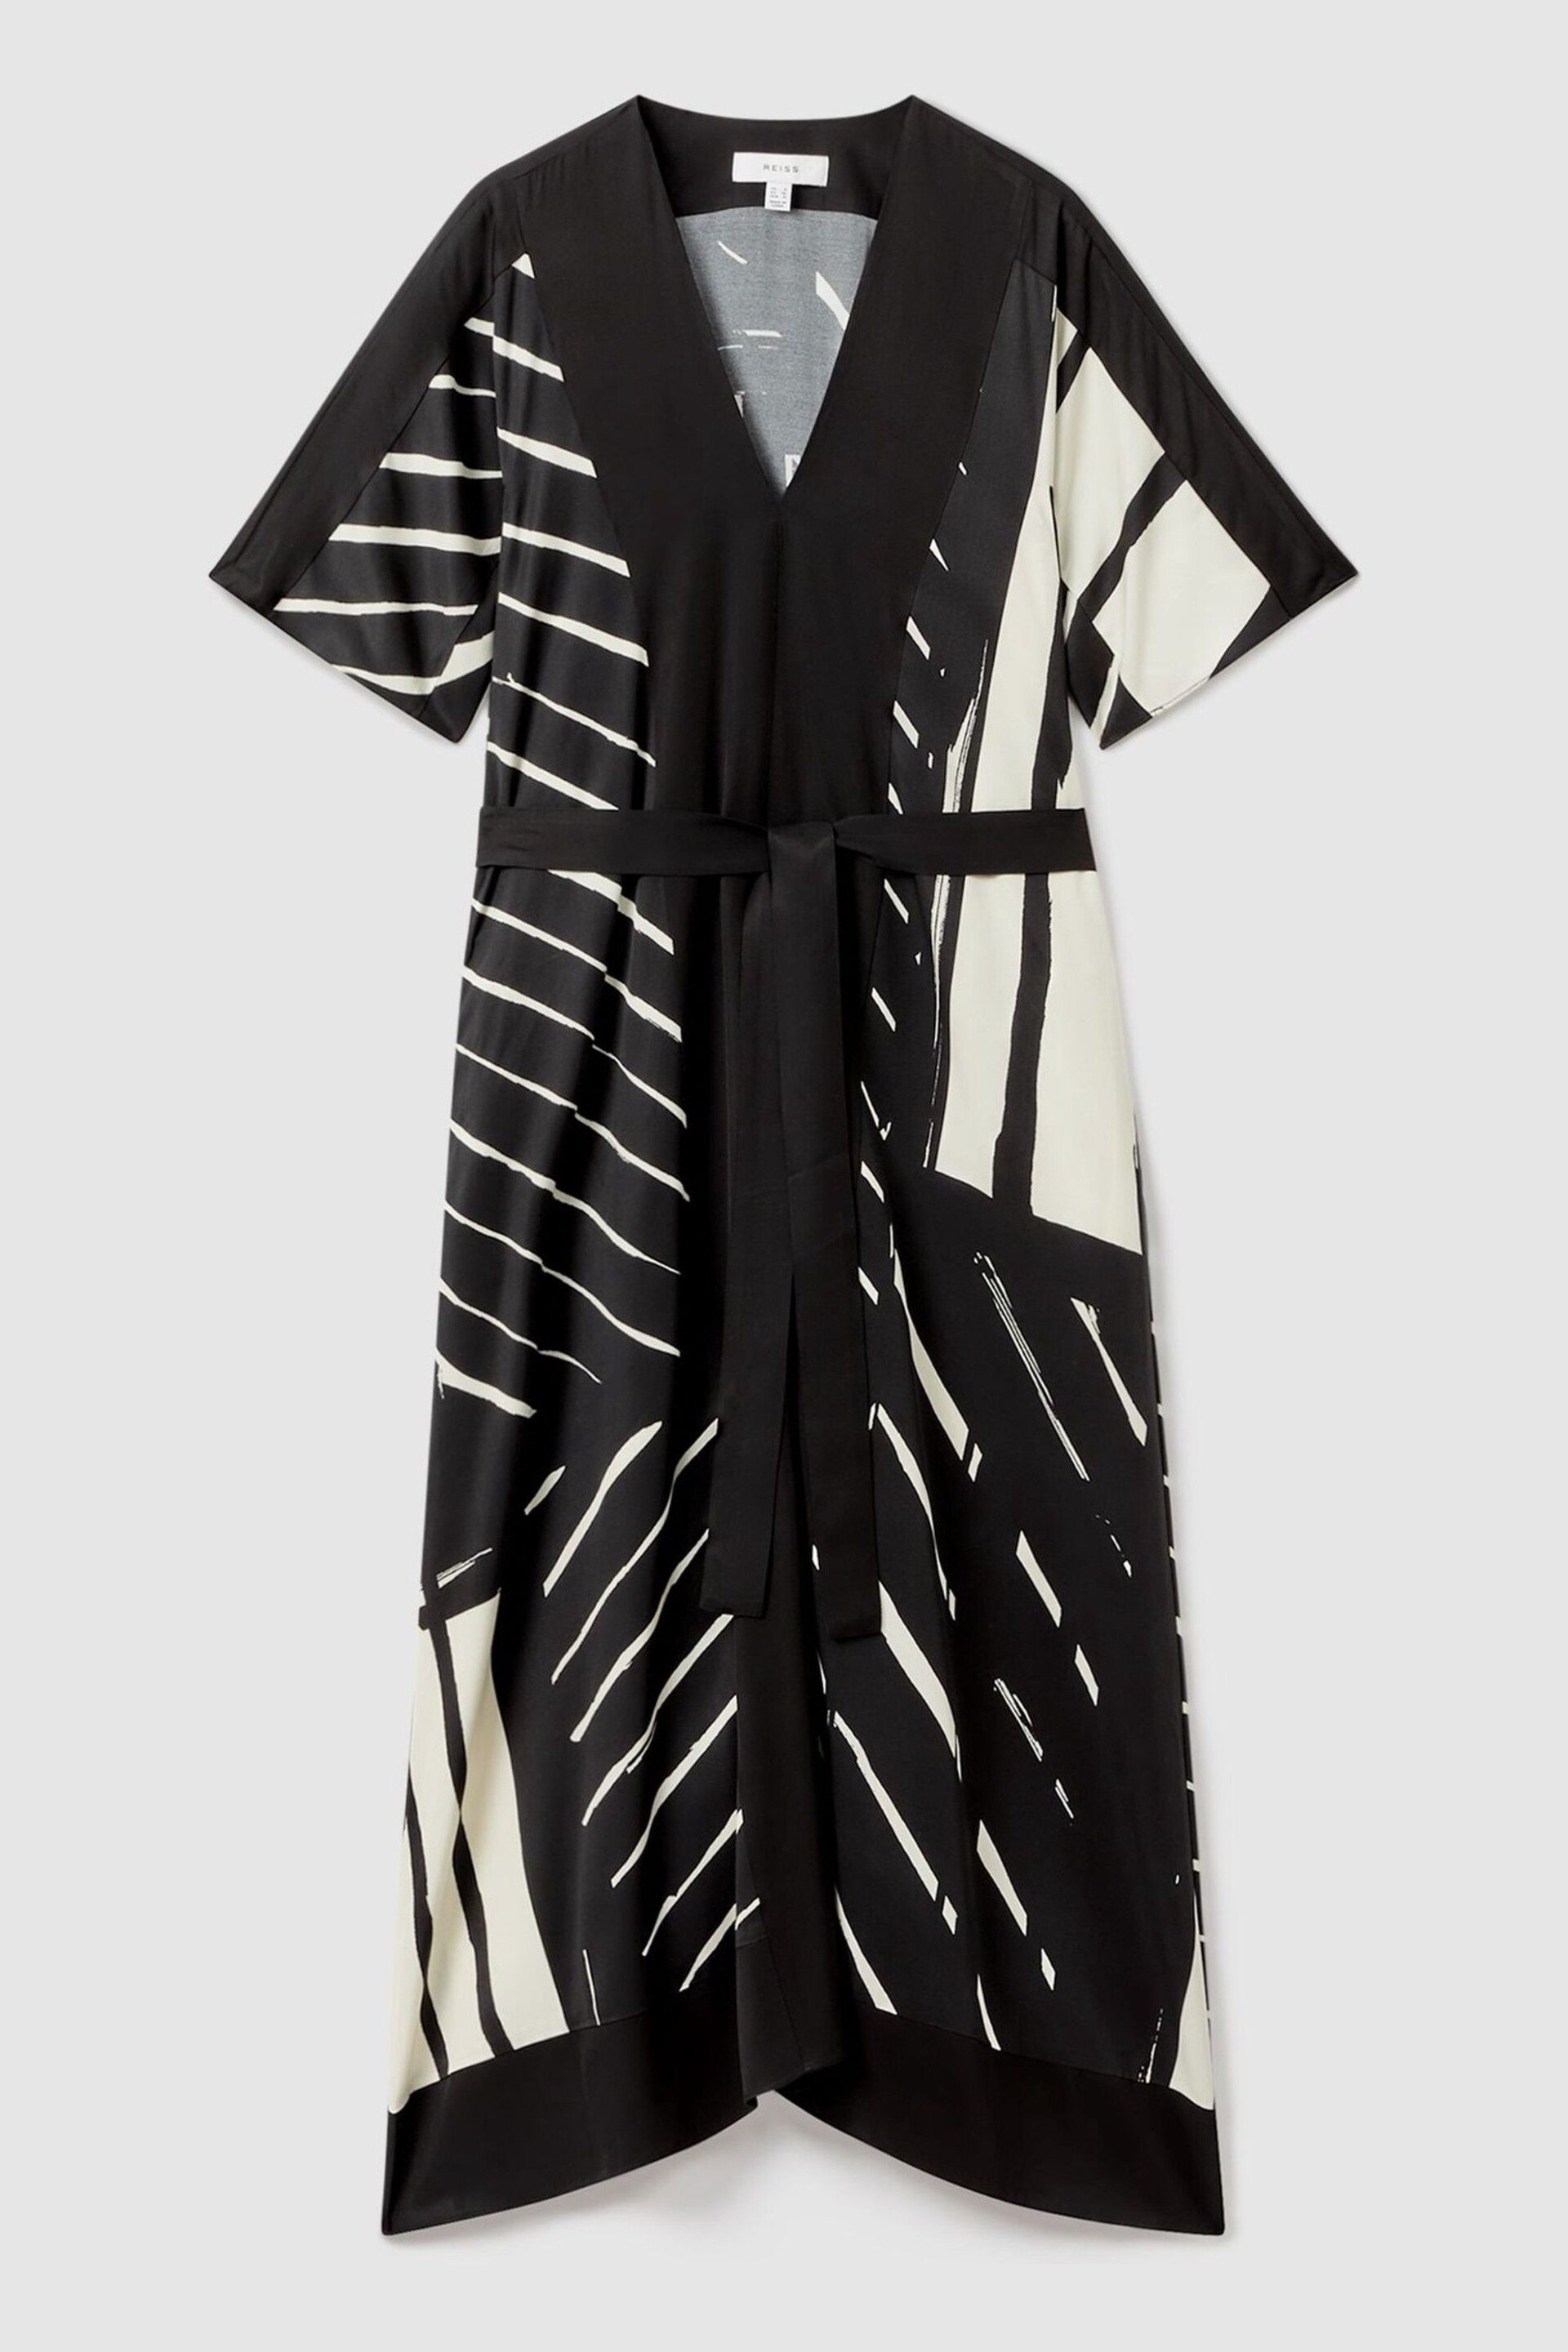 Reiss Black/White Cami Printed Fit and Flare Midi Dress - Image 2 of 7